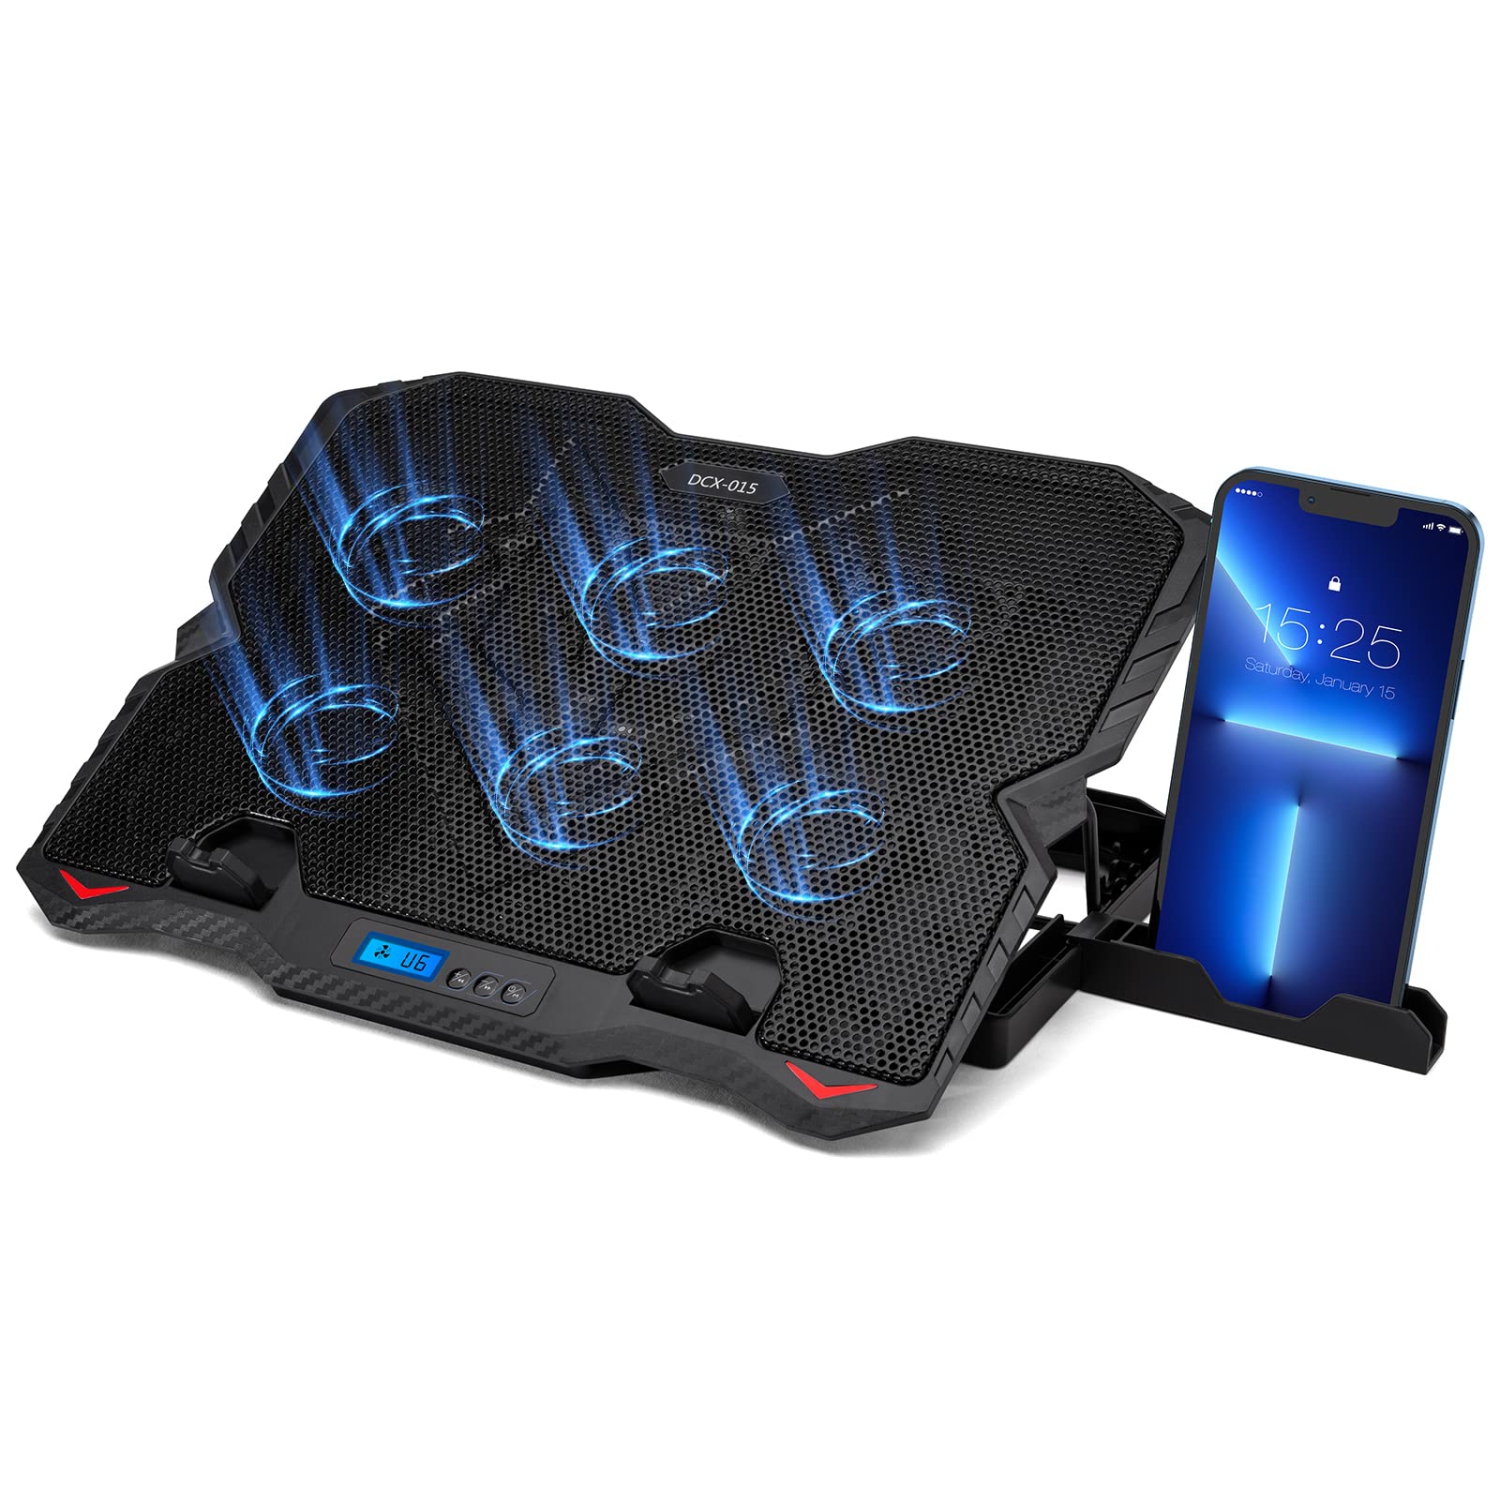 Laptop Cooling Pad, Laptop Cooler with LED Light 6 Quiet Laptop Fan 5 Adjustable Height and Phone Holder, Dual USB Port 3 Modes Laptop Fan Cooling Pad for Gaming Laptop Office